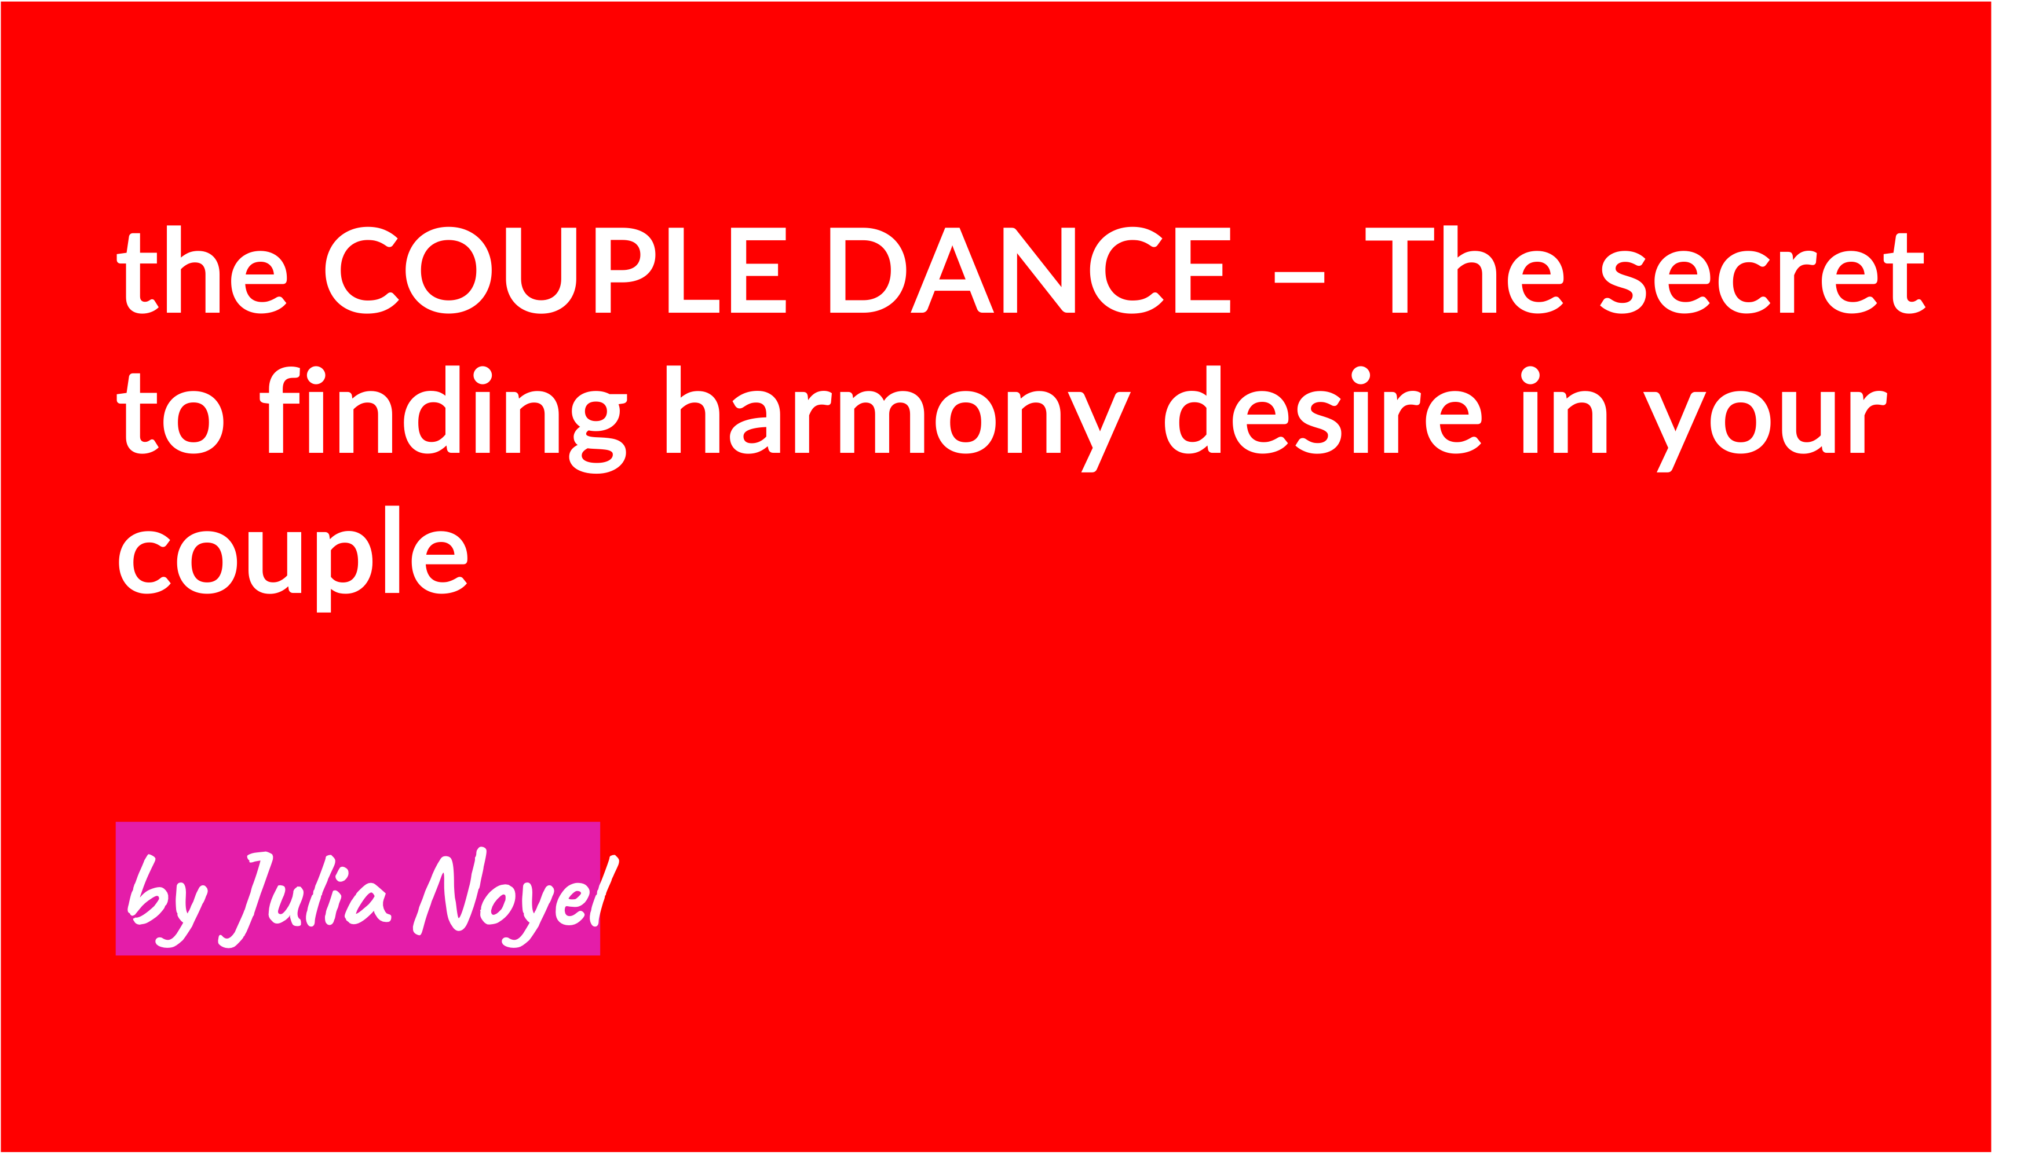 the COUPLE DANCE – The secret to finding harmony desire in your couple by Julia Noyel